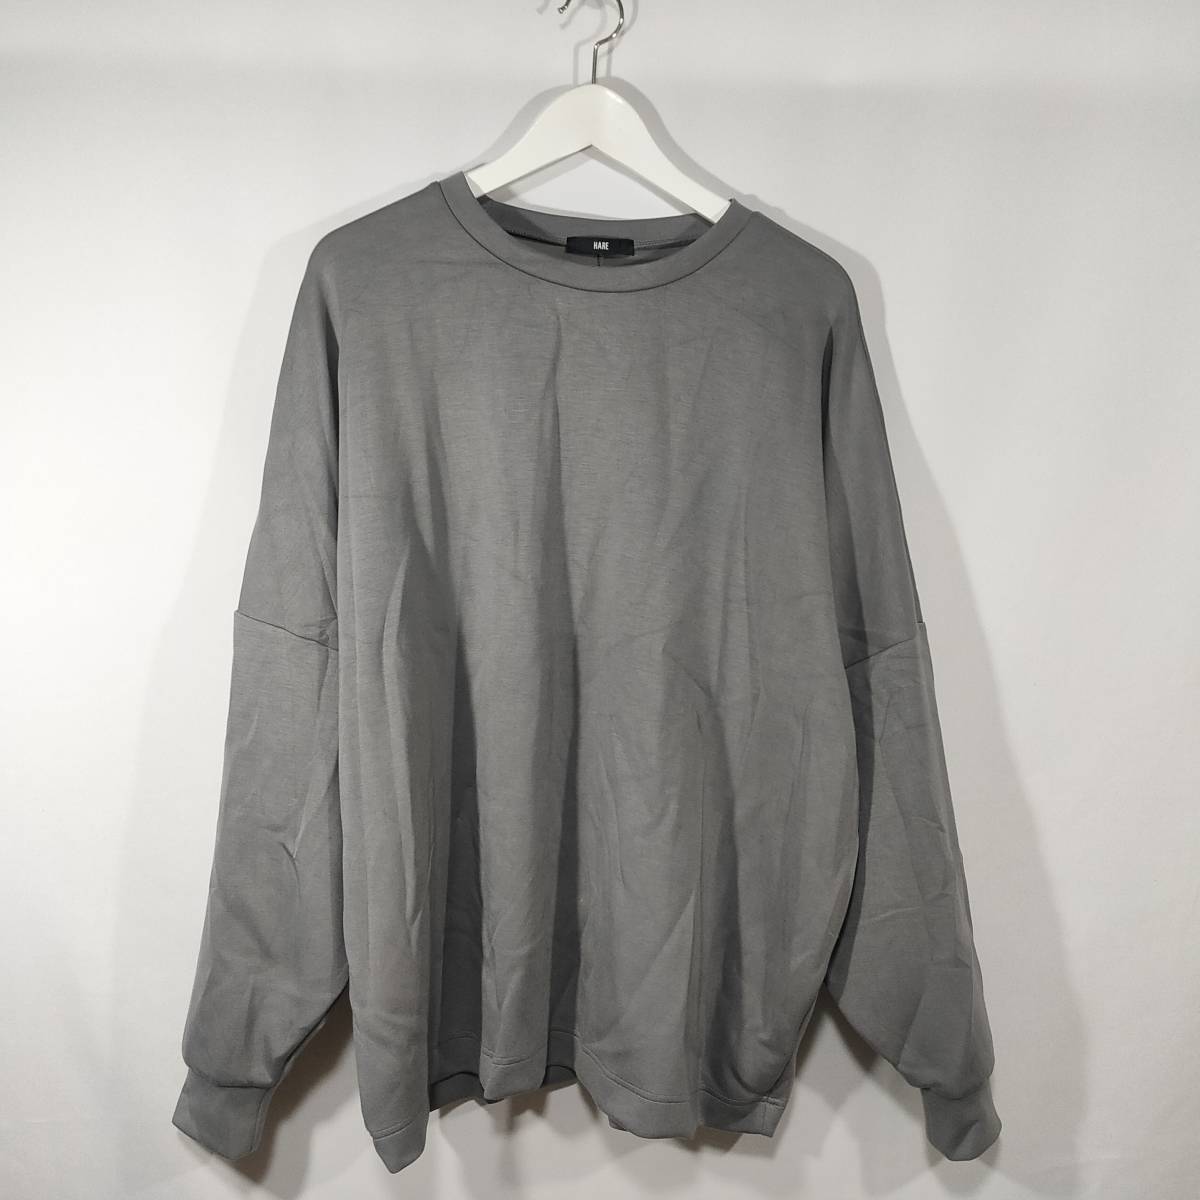  Hare HARE sweatshirt pull over cut and sewn crew neck big Silhouette long sleeve F gray men's used /CG